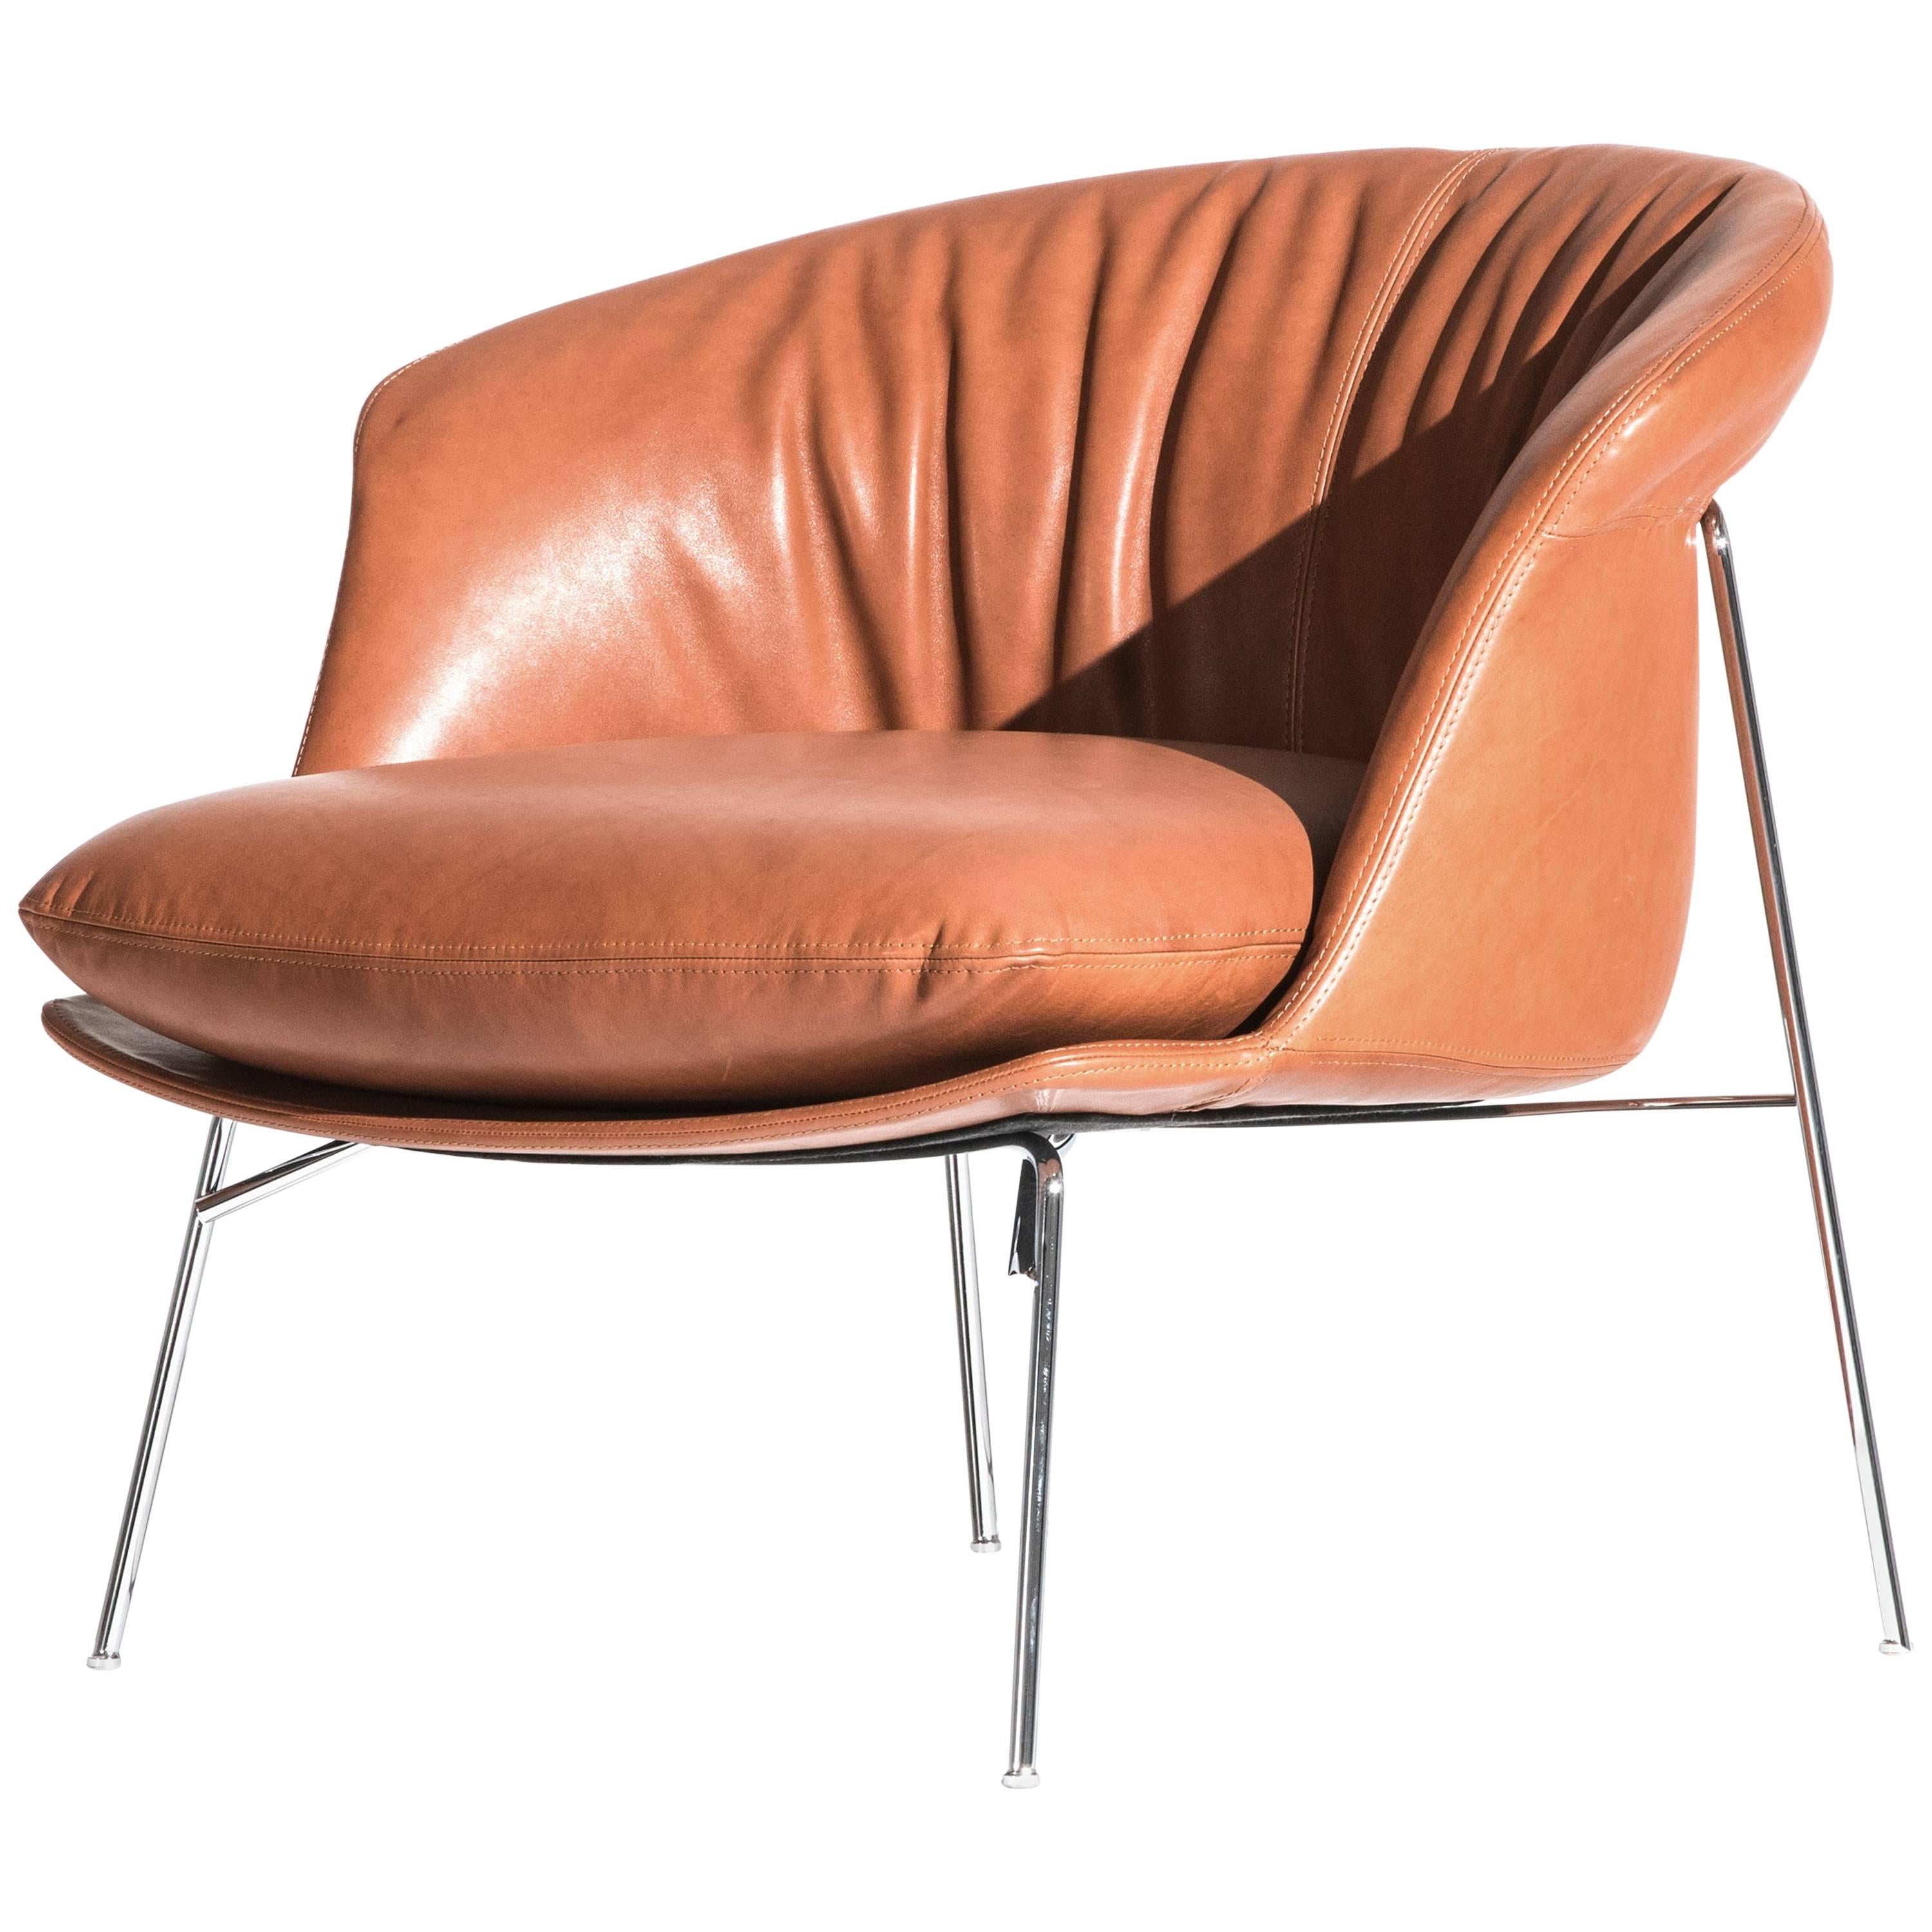 Moon Armchair in Brown Leather Cushion by Ludovica & Roberto Palomba for Driade